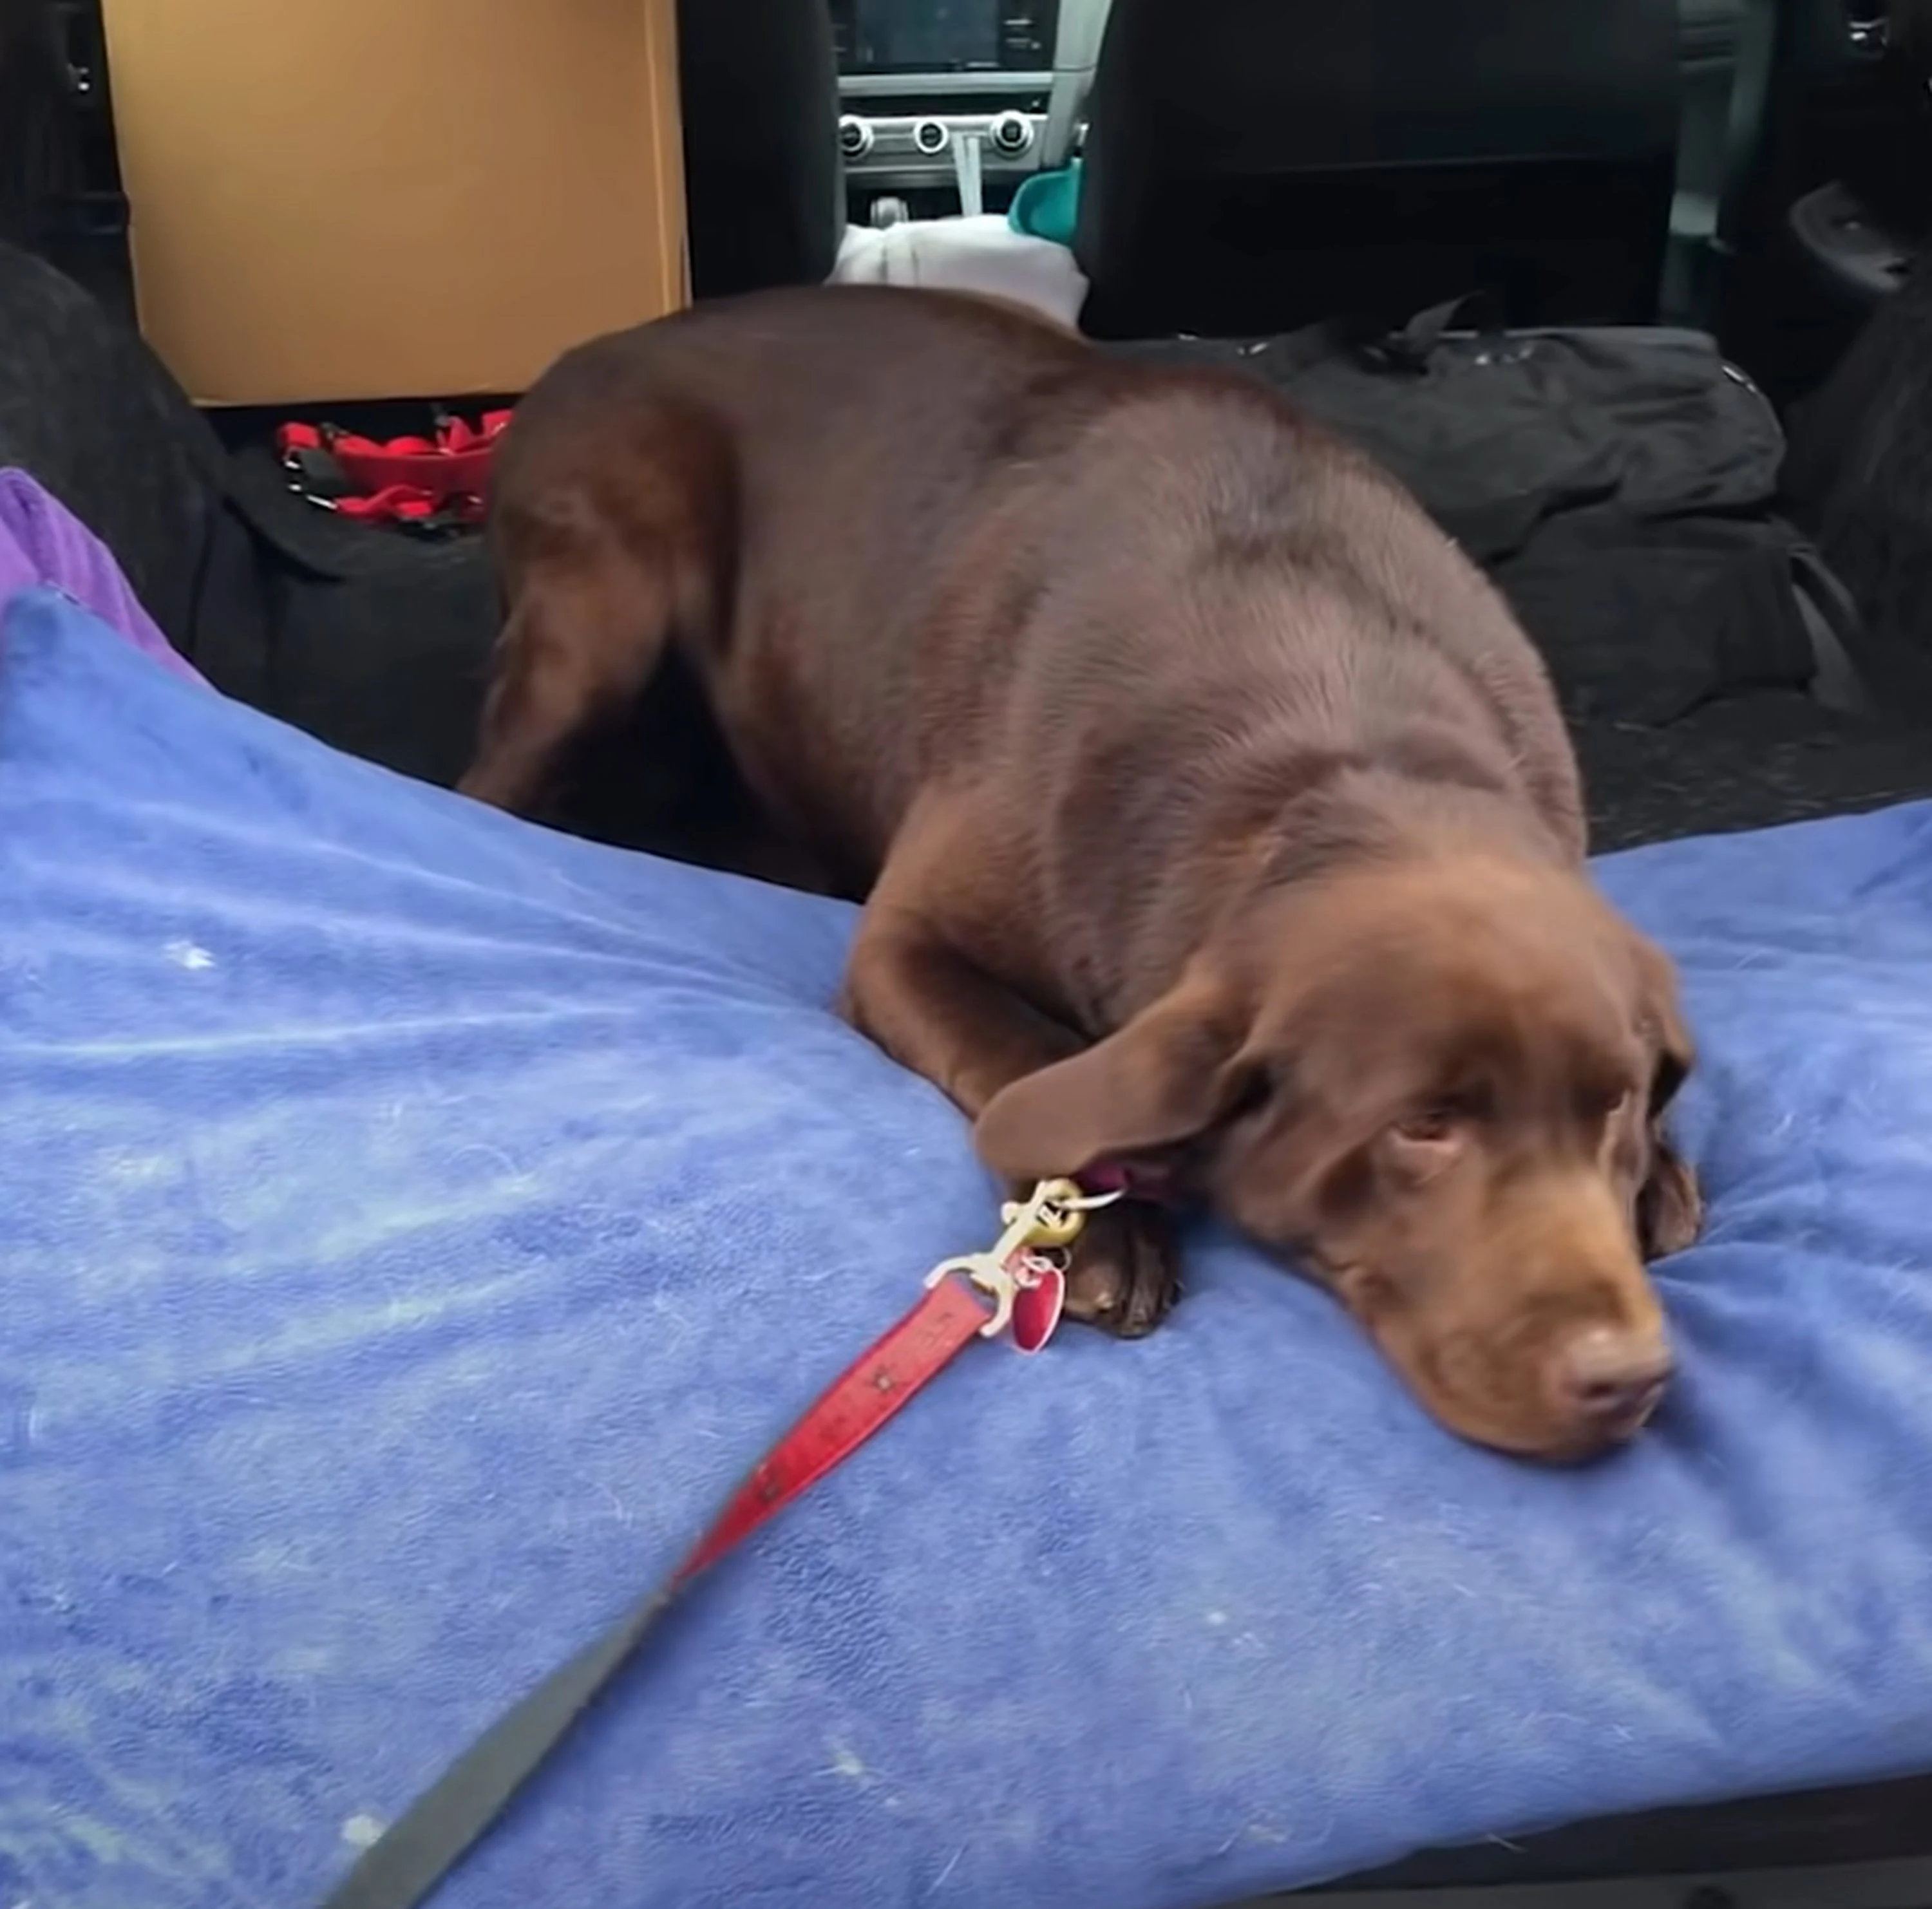 Traumatized Puppy is lying in the car on a blue blanket